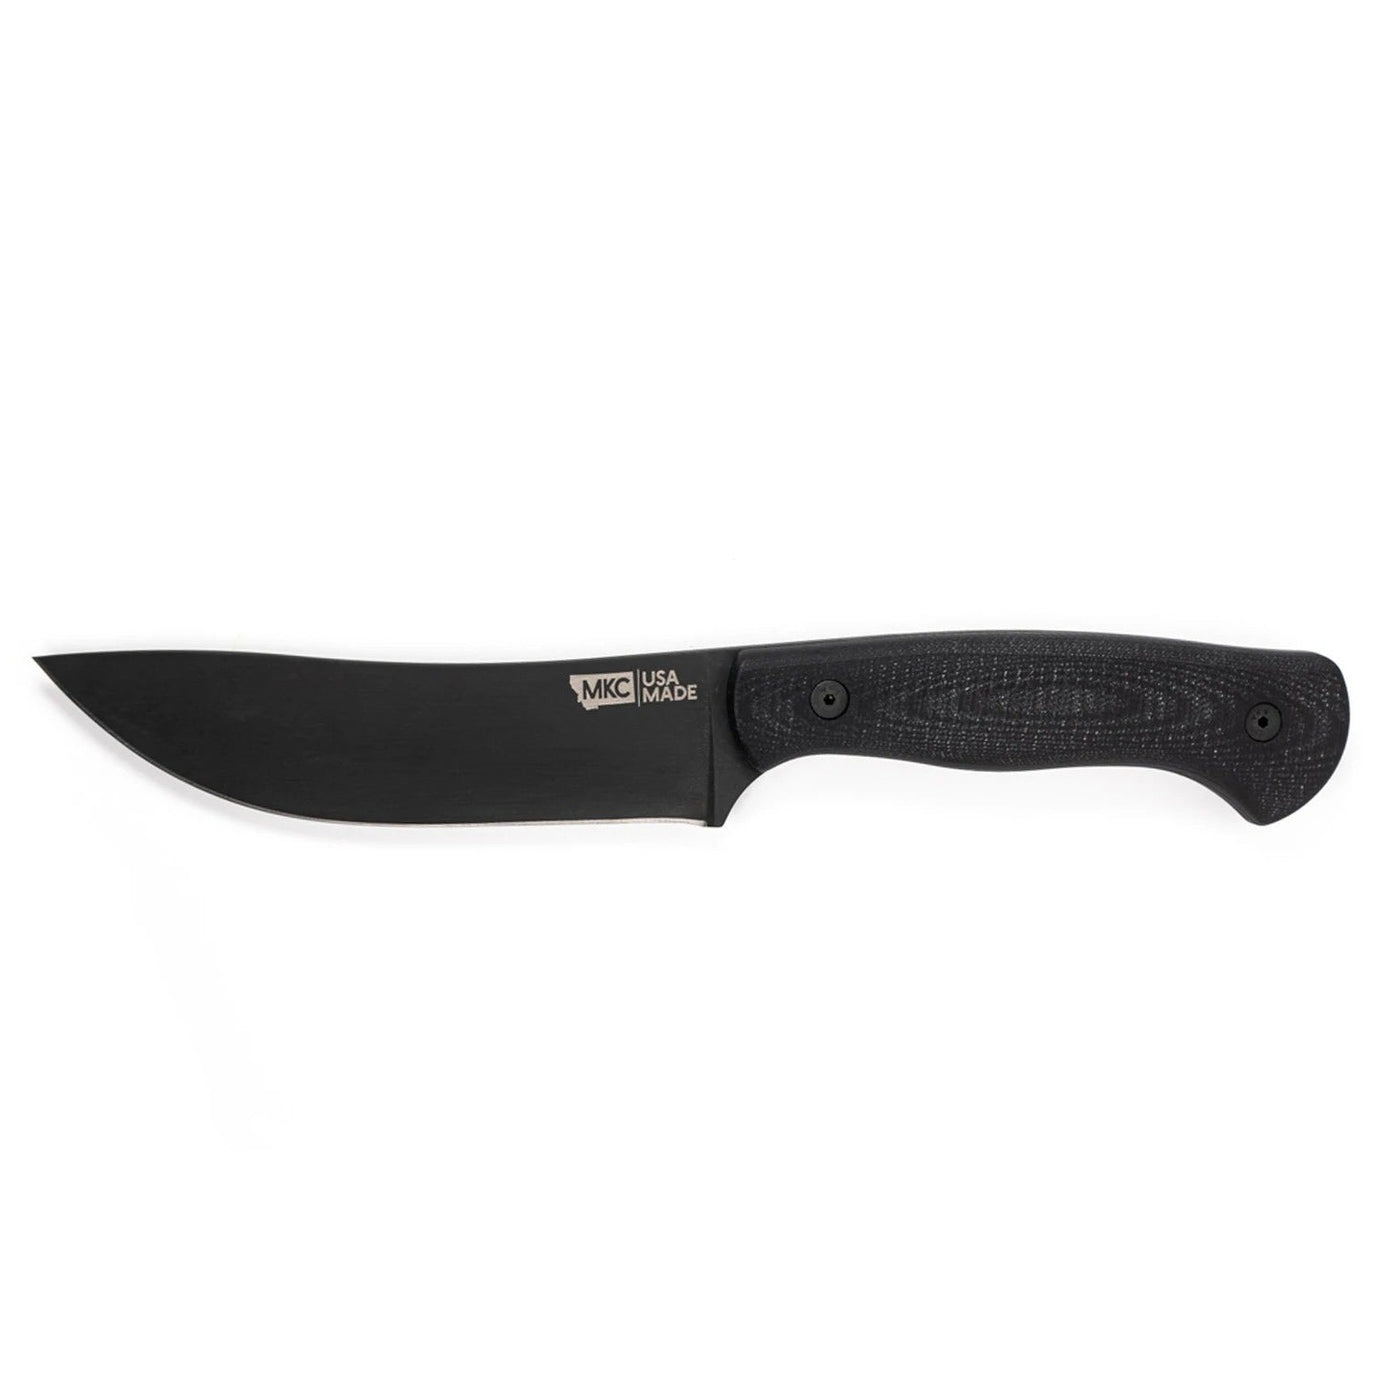 Montana Knife The Stone Wall Skinning Knife-KNIFE-Black-Kevin's Fine Outdoor Gear & Apparel